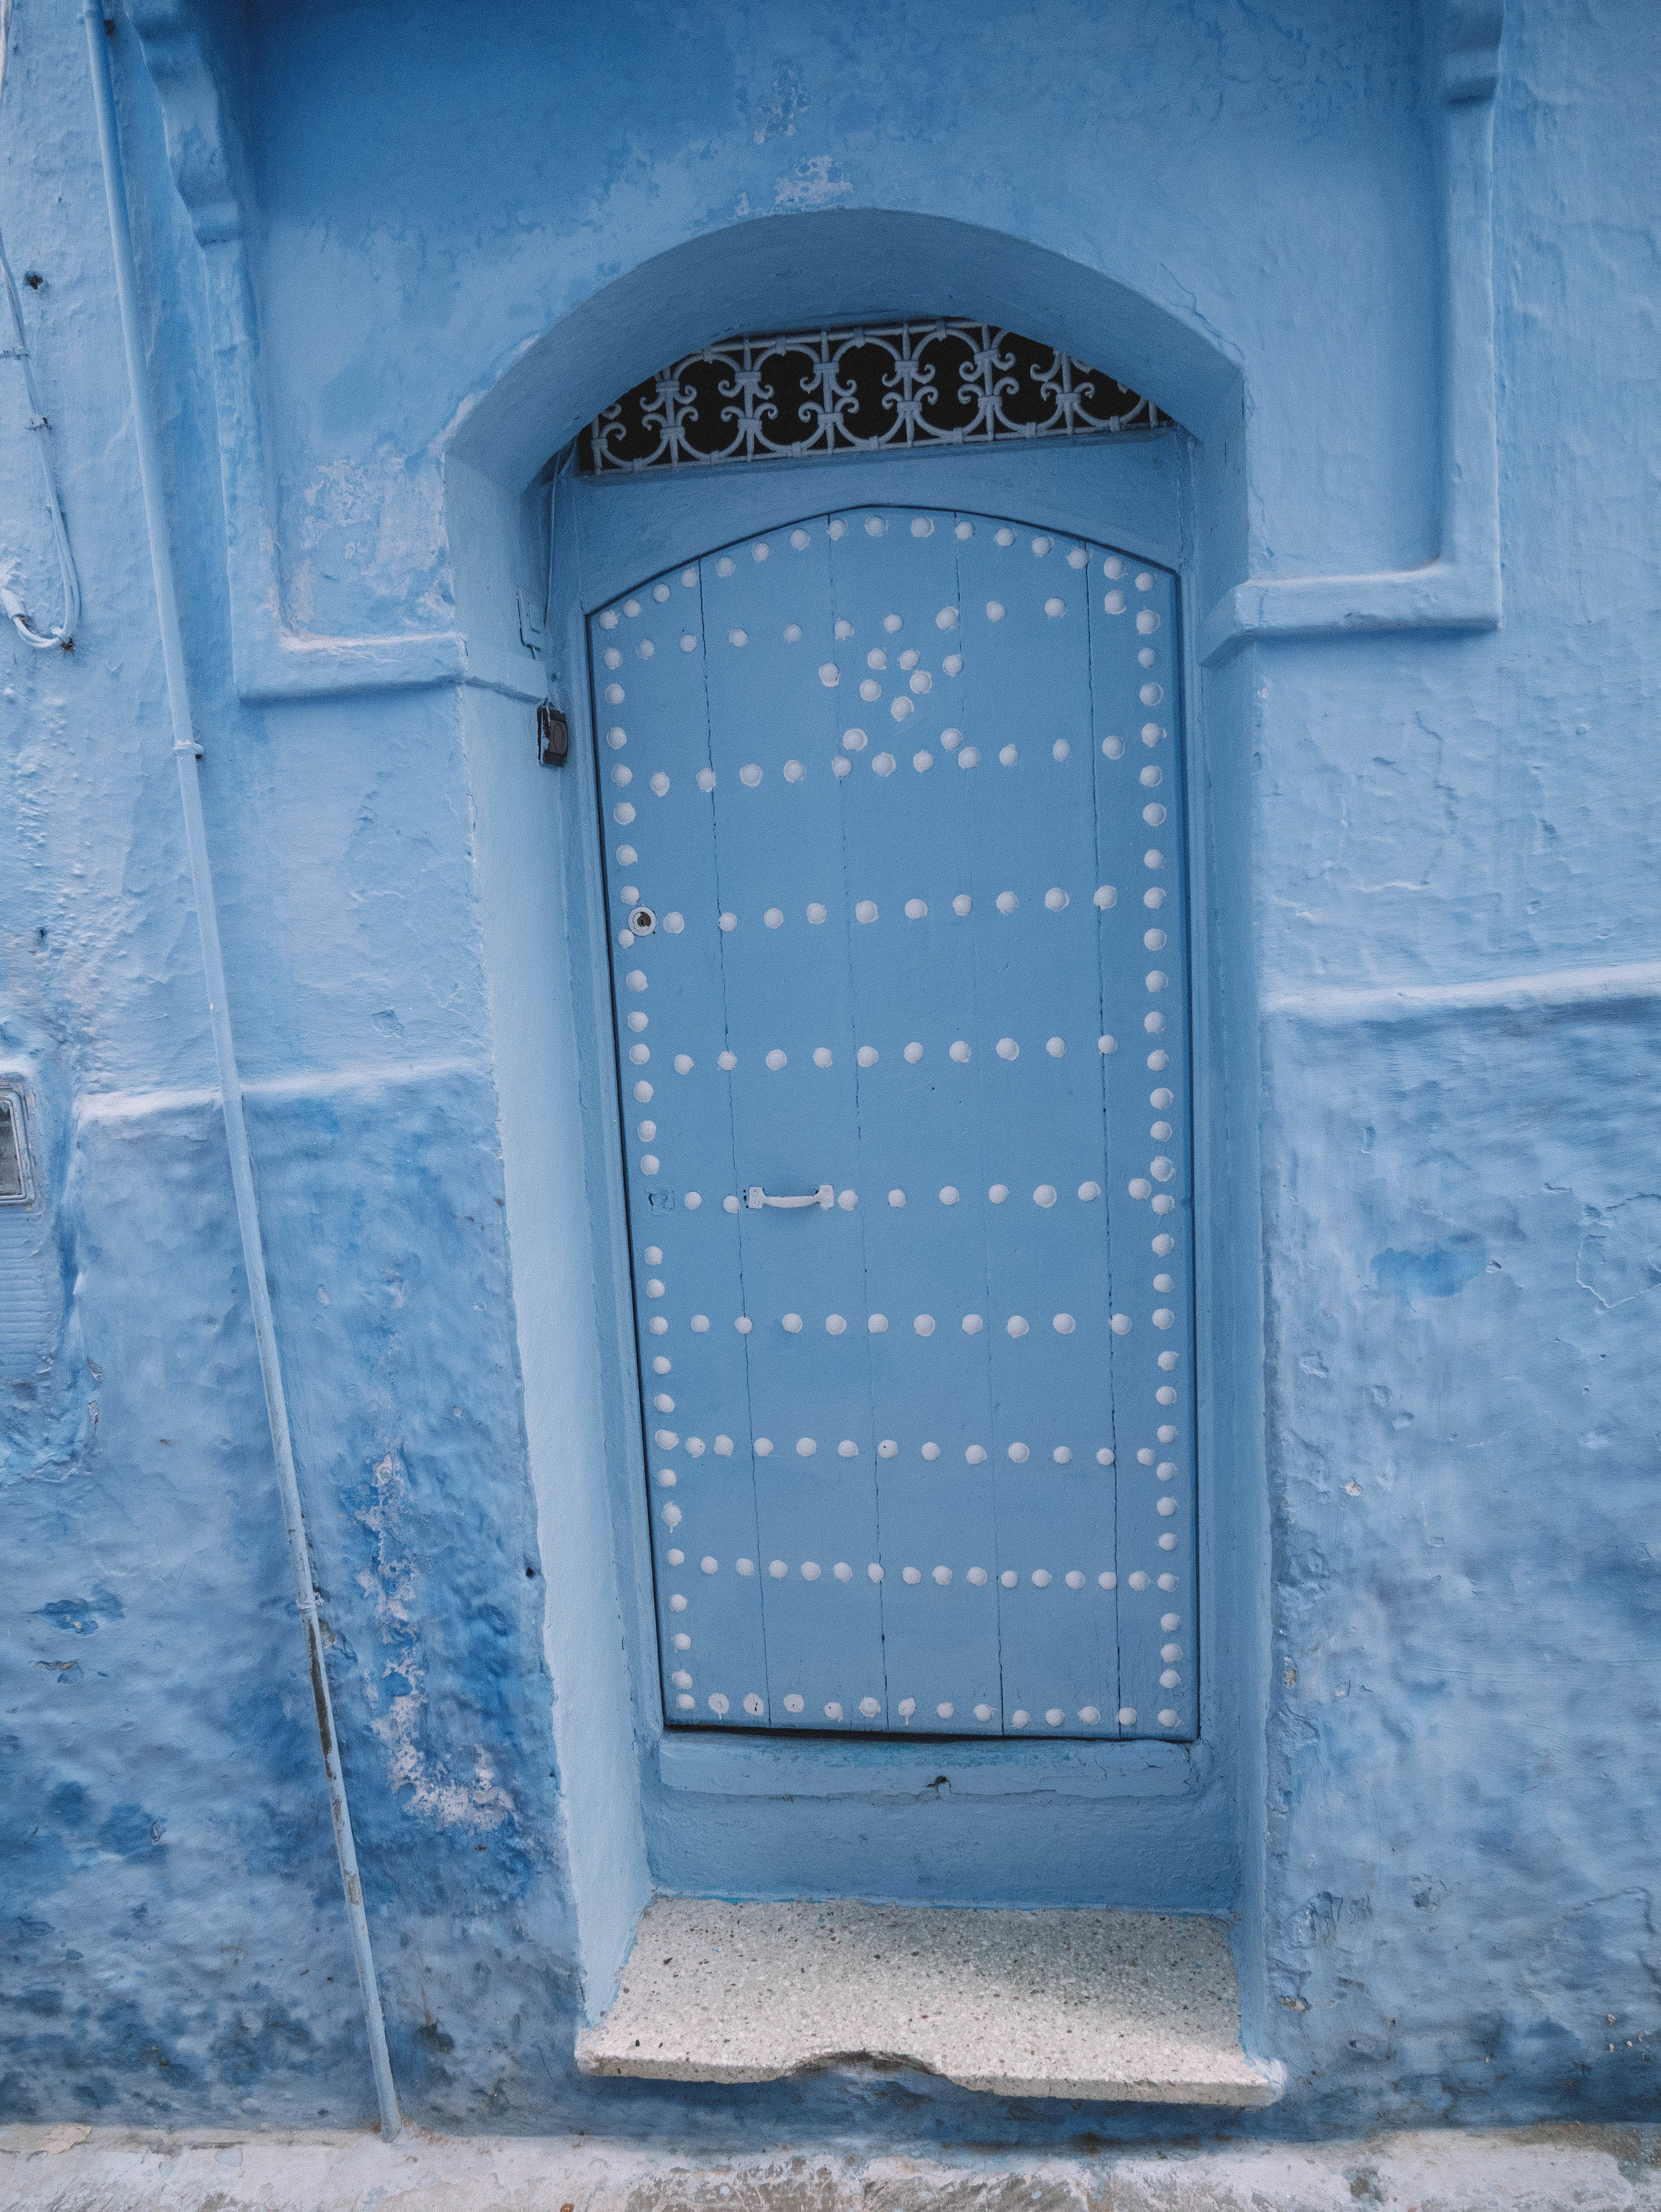 Another blue door - Chefchaouen - Morocco